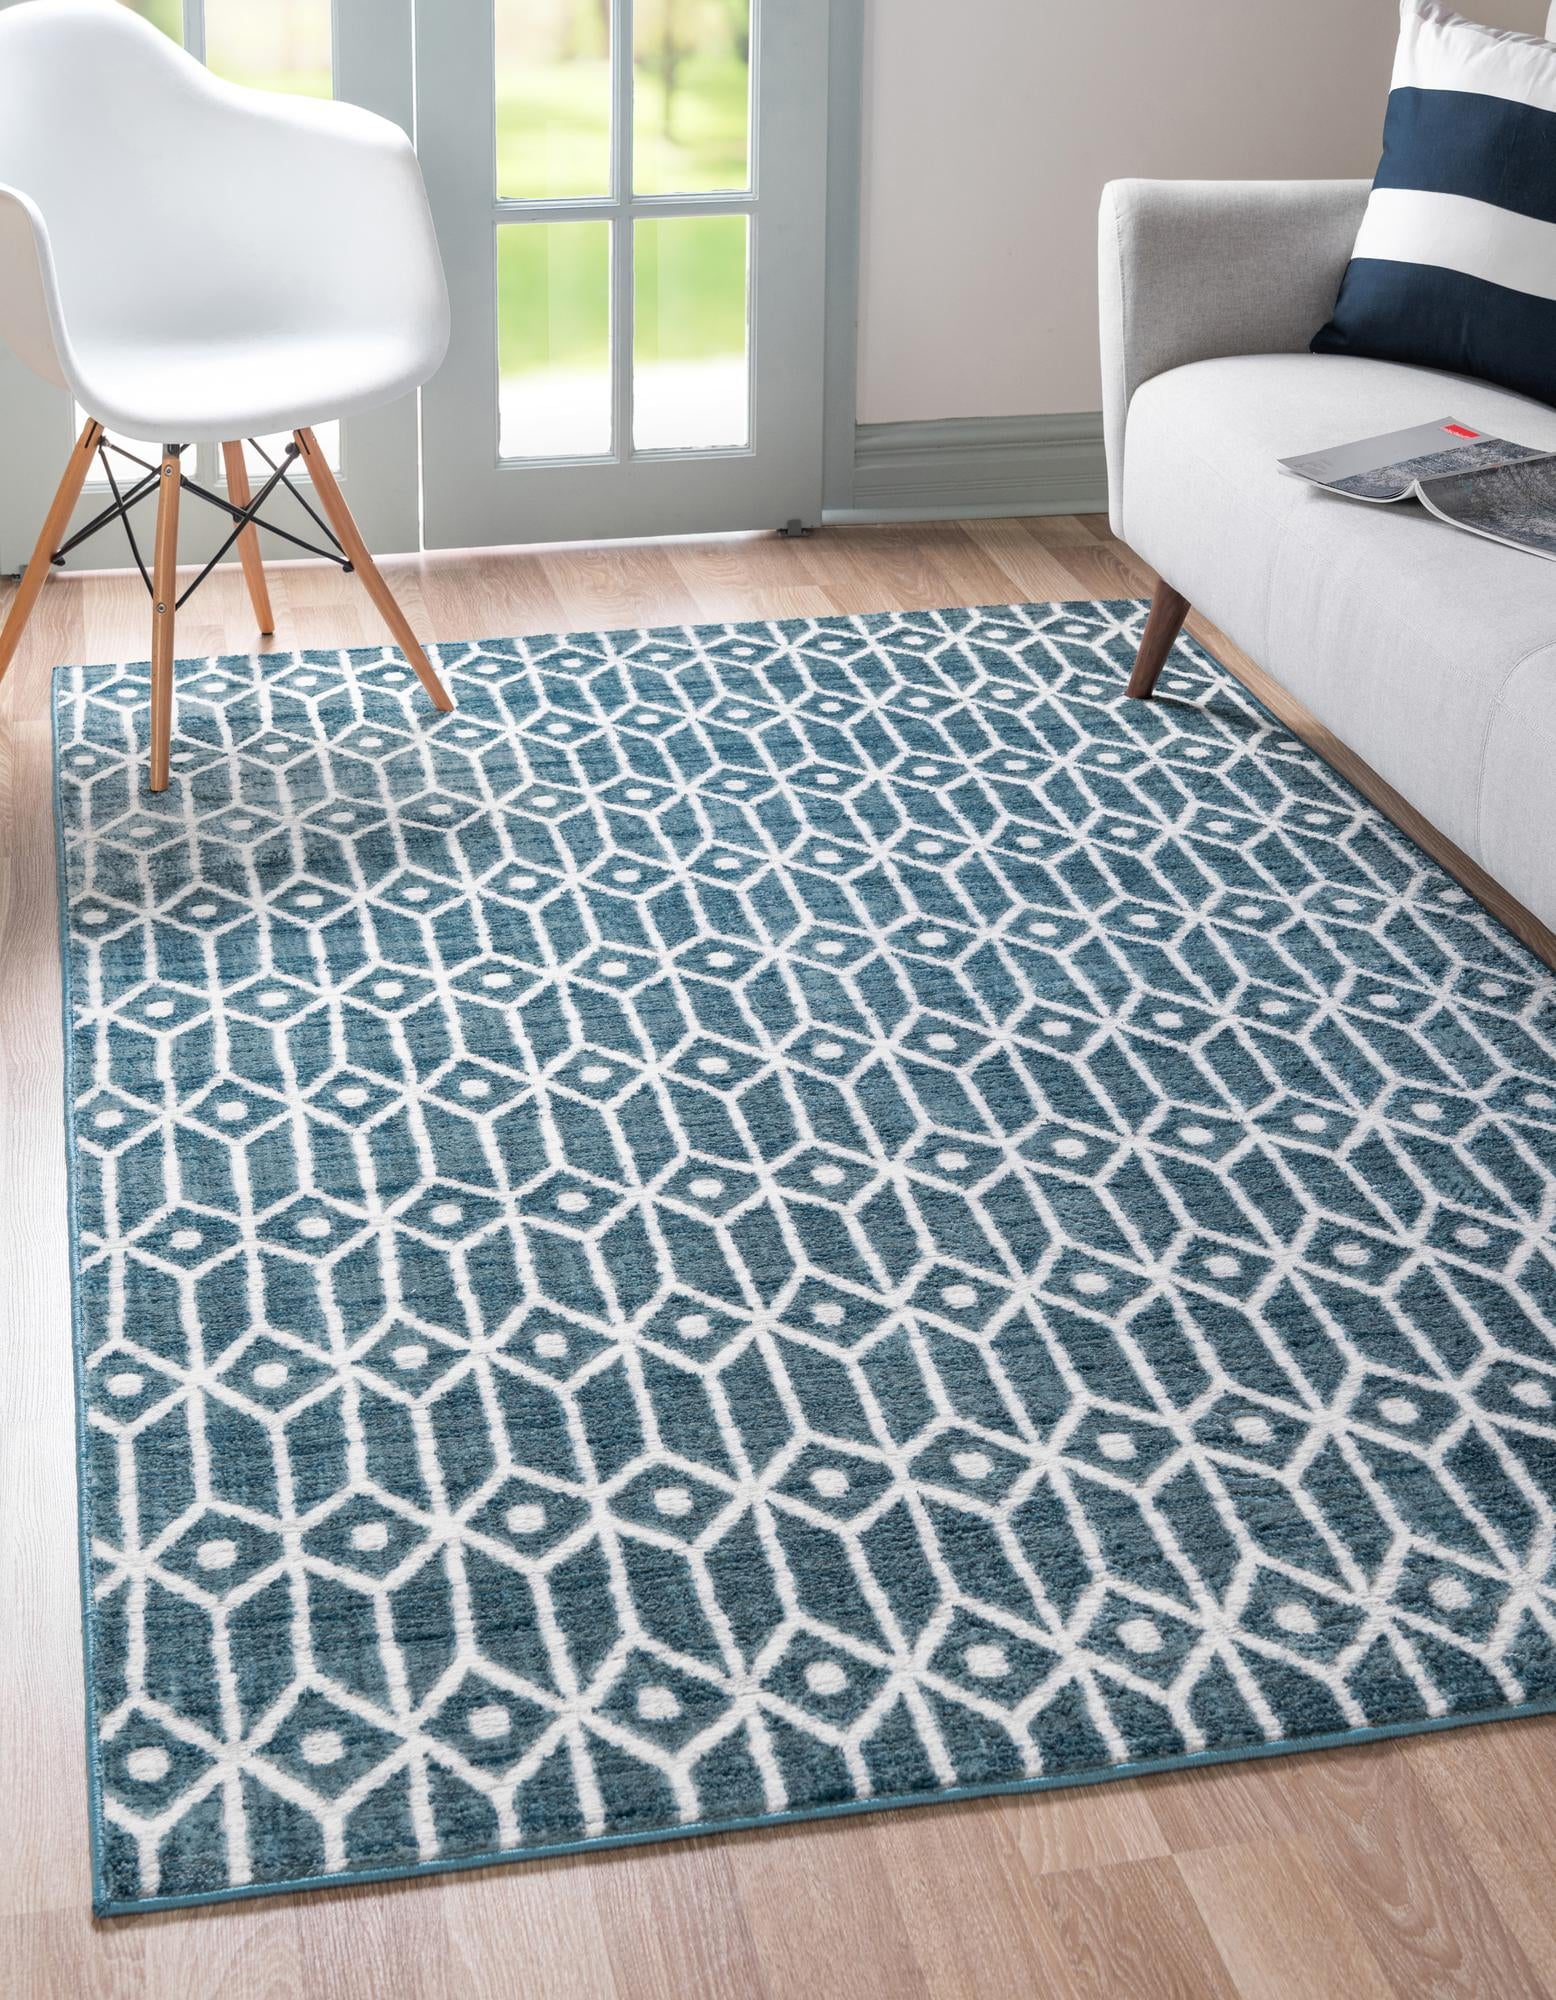 Large Dining Rooms 9' x 12' Light Blue Shag Rug Perfect for Living Rooms Rugs.com Lattice Shag Collection Rug Open Floorplans 